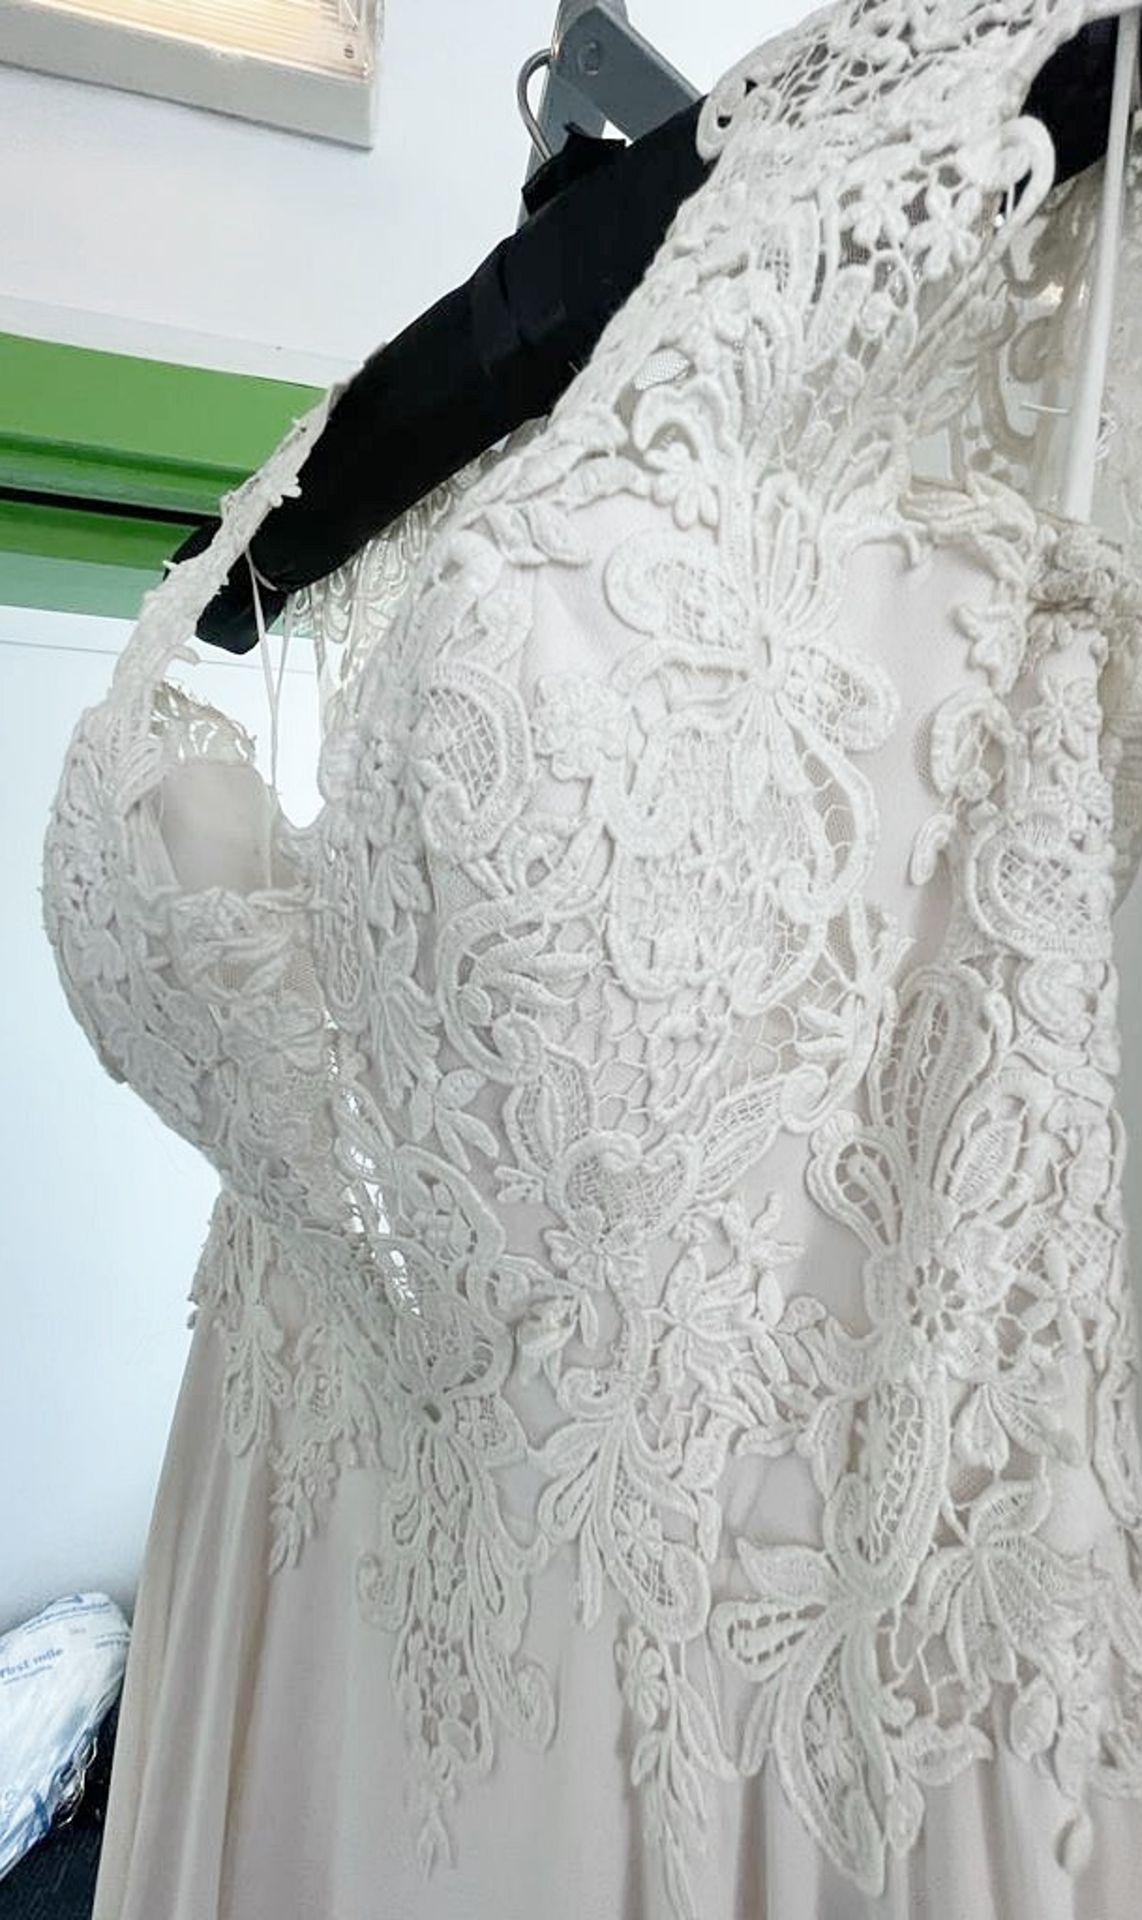 1 x LILIAN WEST 'Kate' Designer Crochet Lace Sweetheart Wedding Dress Bridal Gown, With Silk Flowing - Image 3 of 14